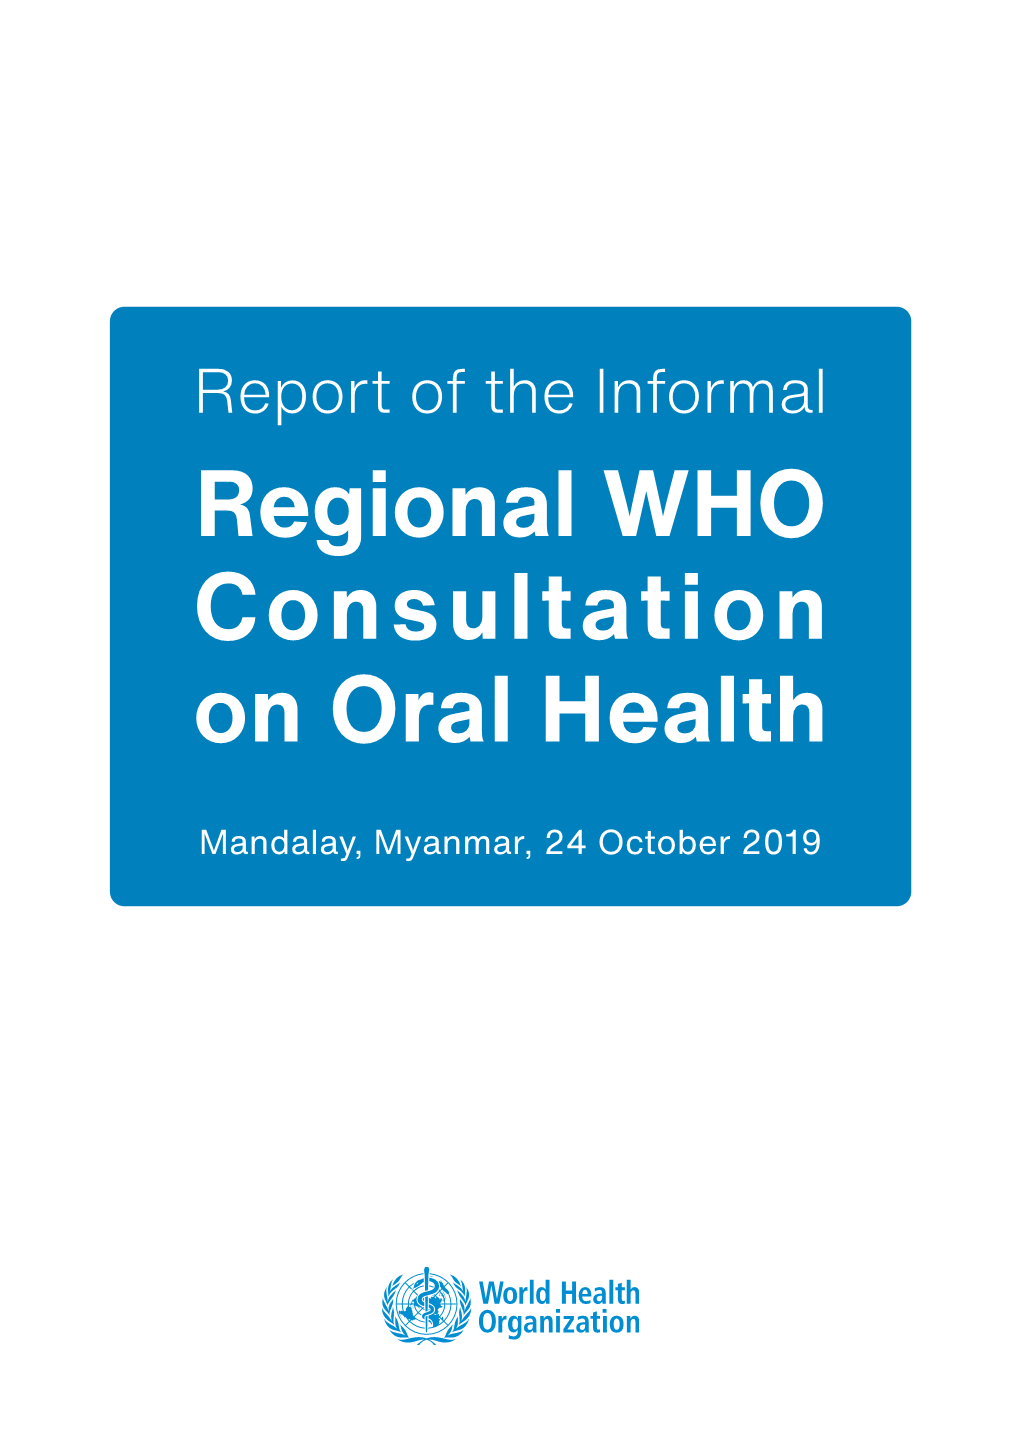 Regional WHO Consultation on Oral Health